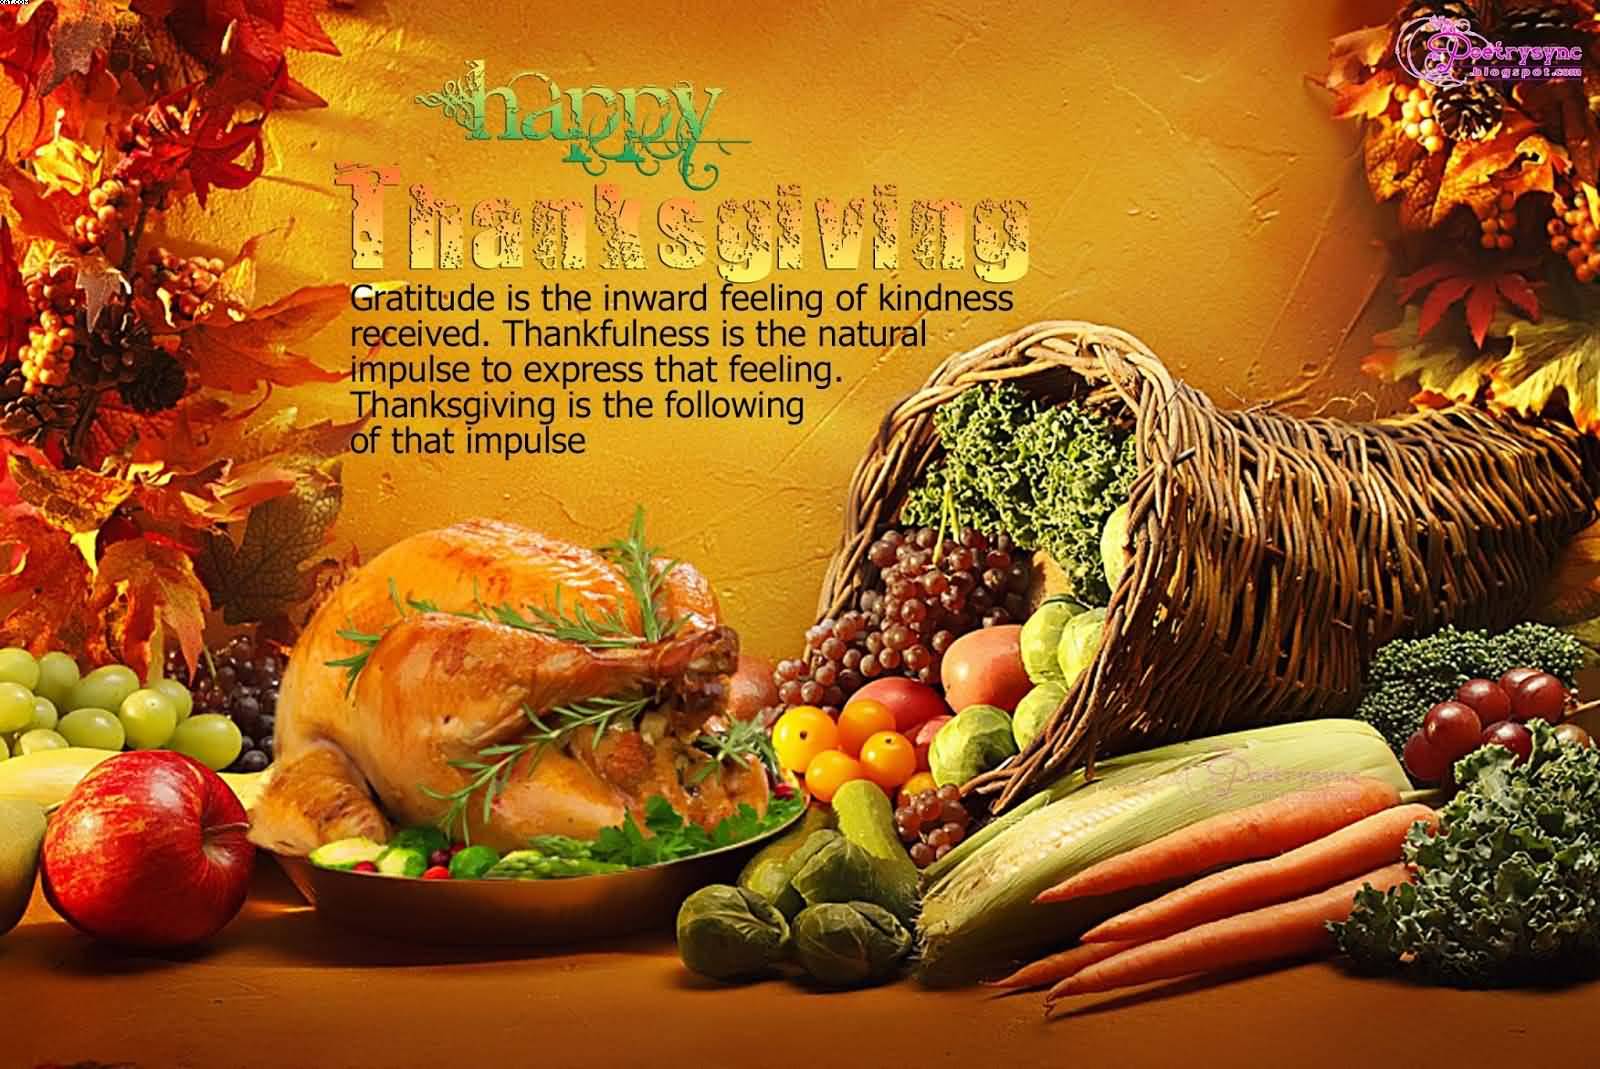 Happy Thanksgiving Food wishes wallpaper